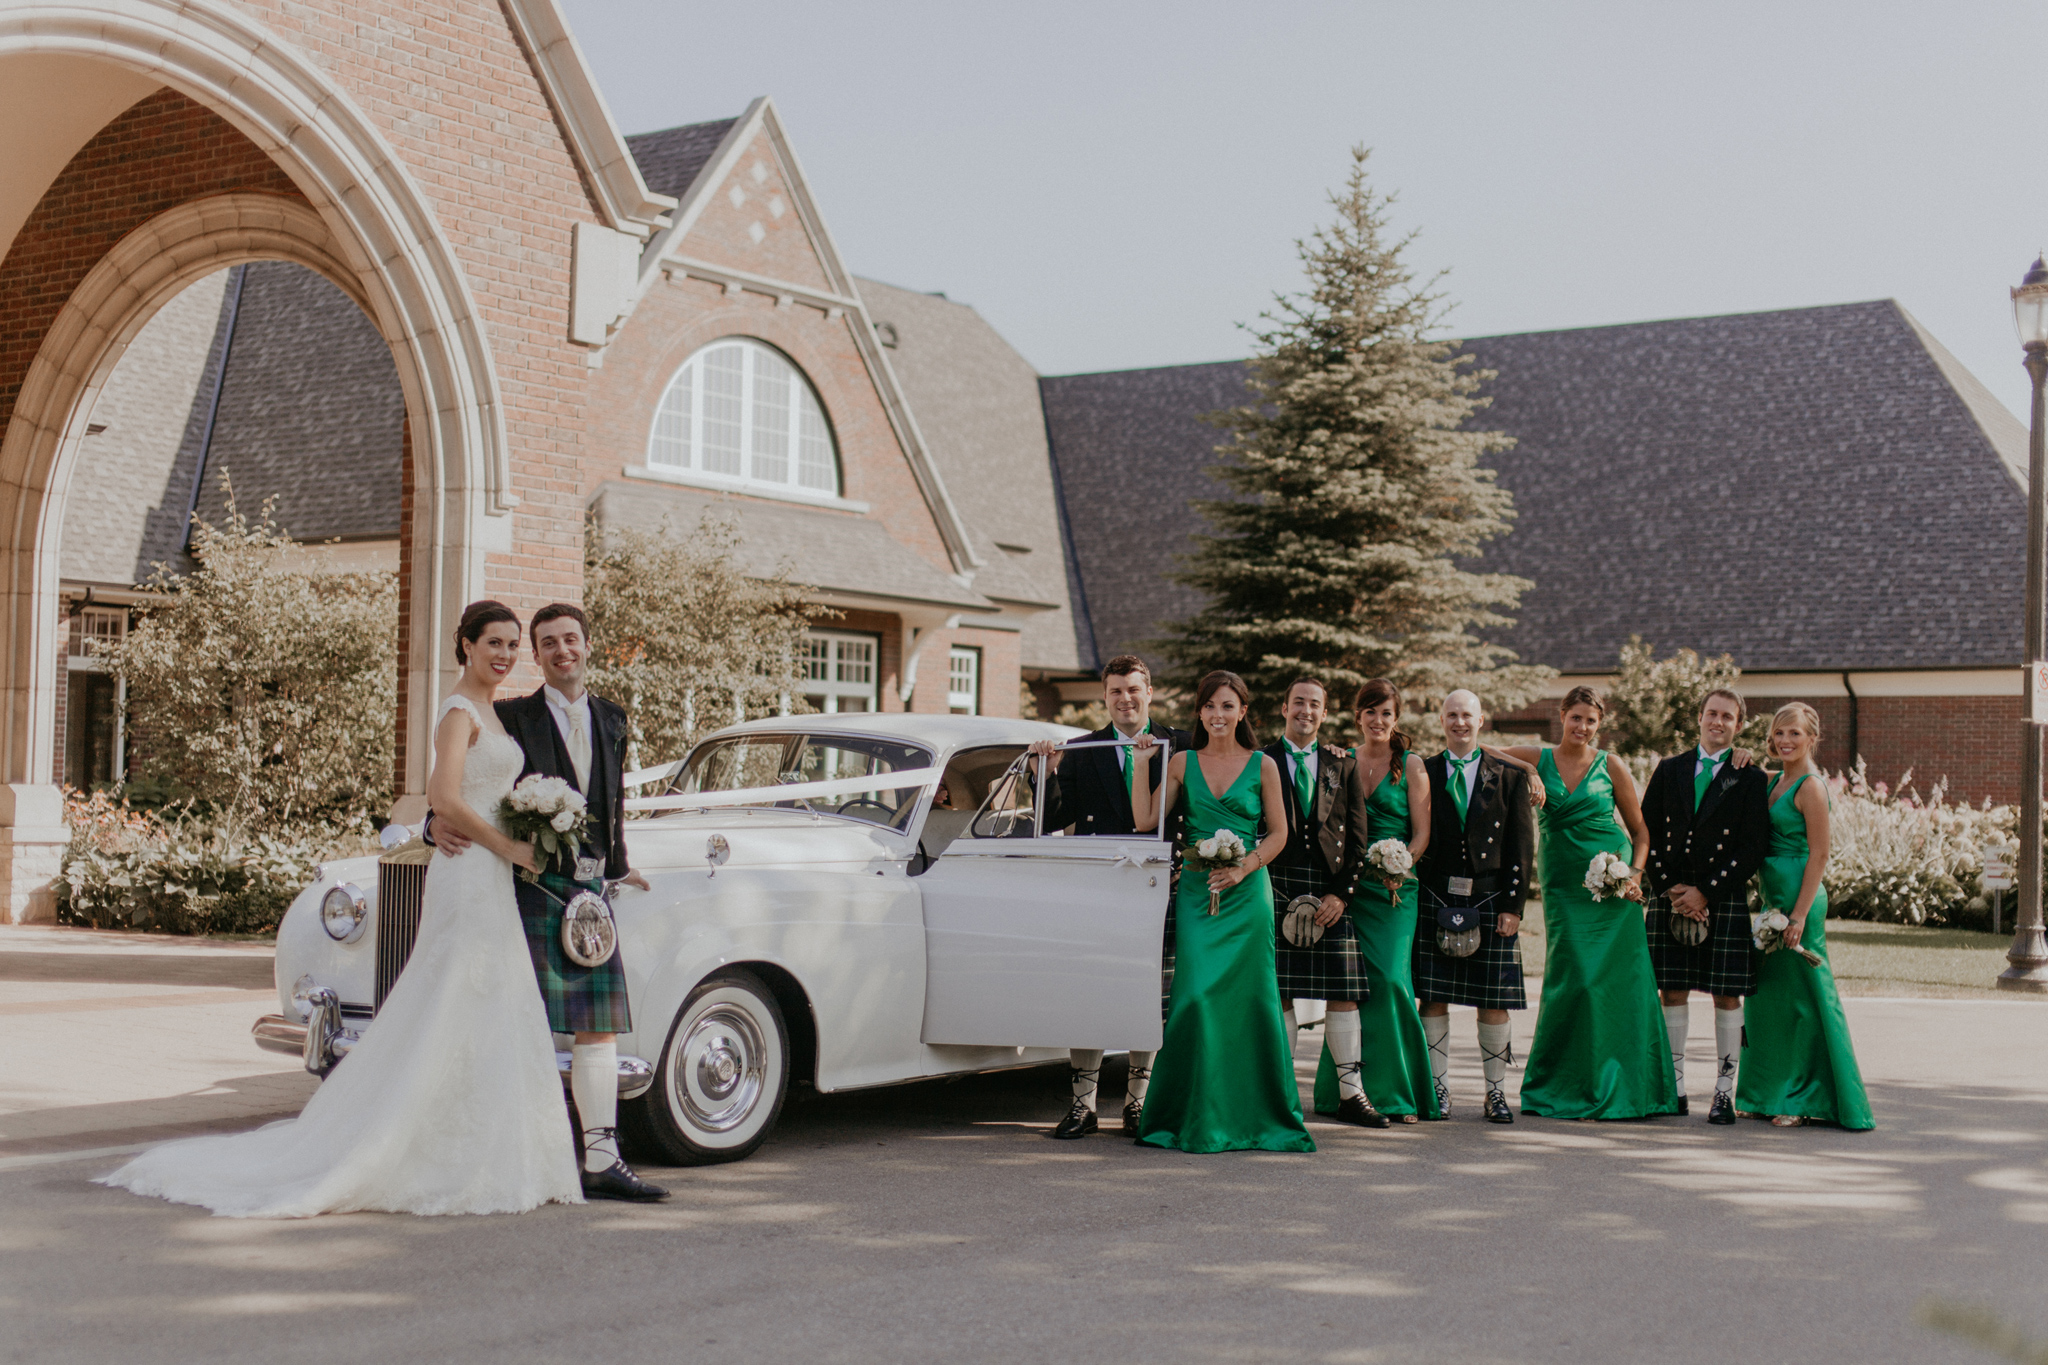 Wedding party pose in kilts and green bridesmaid's dresses with Rolls Royce